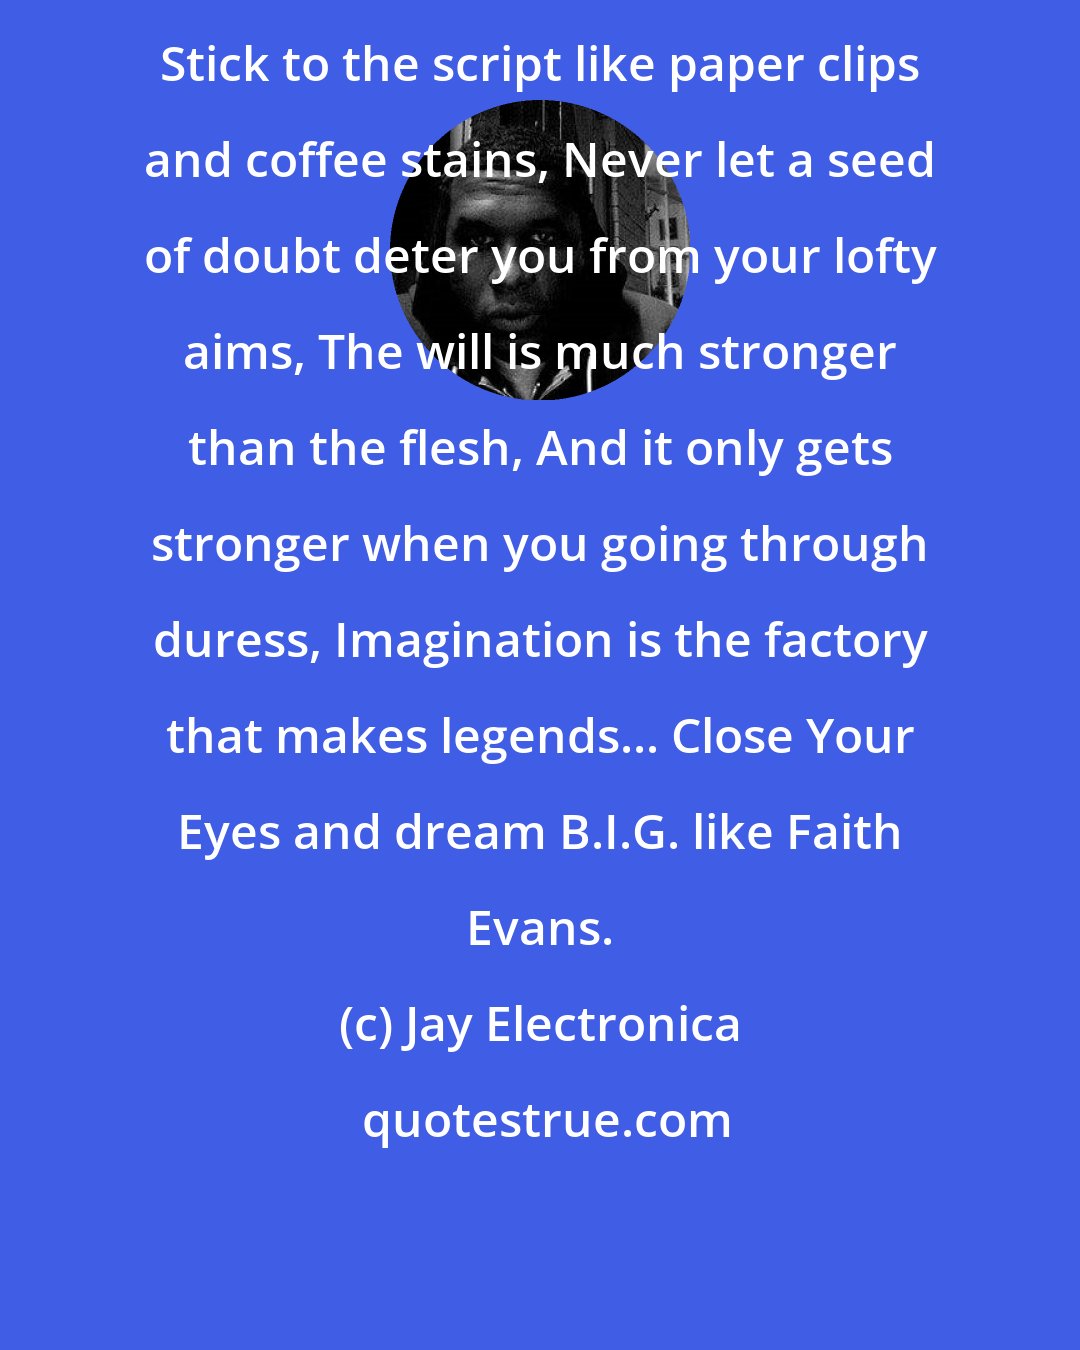 Jay Electronica: Stick to the script like paper clips and coffee stains, Never let a seed of doubt deter you from your lofty aims, The will is much stronger than the flesh, And it only gets stronger when you going through duress, Imagination is the factory that makes legends... Close Your Eyes and dream B.I.G. like Faith Evans.